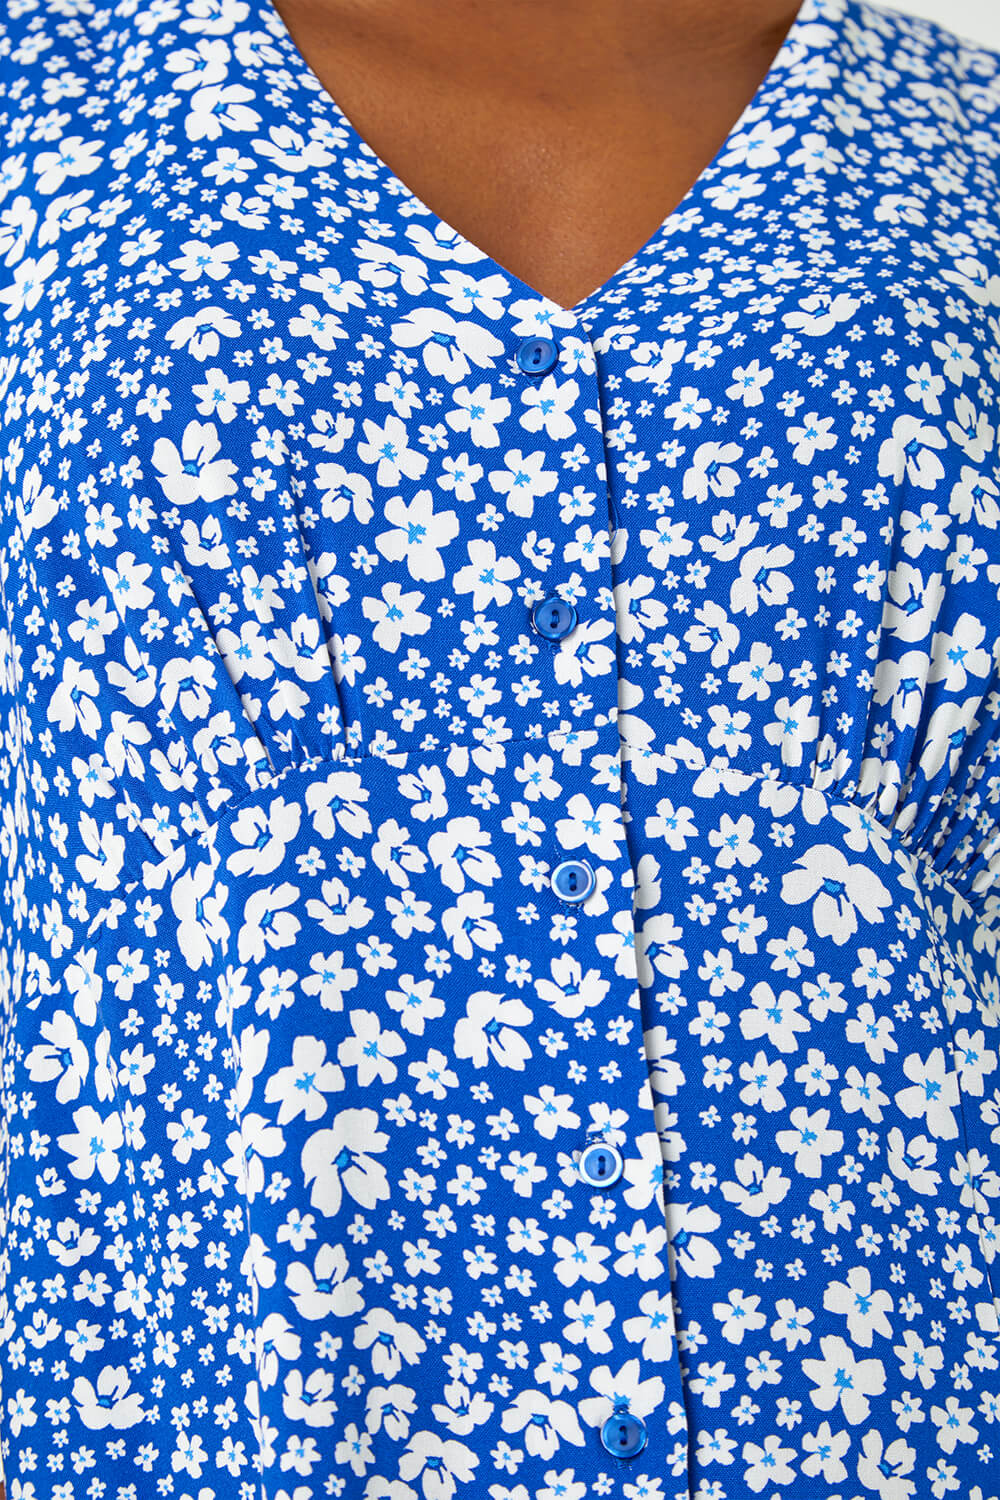 Blue Ditsy Floral Print Button Dress, Image 5 of 5